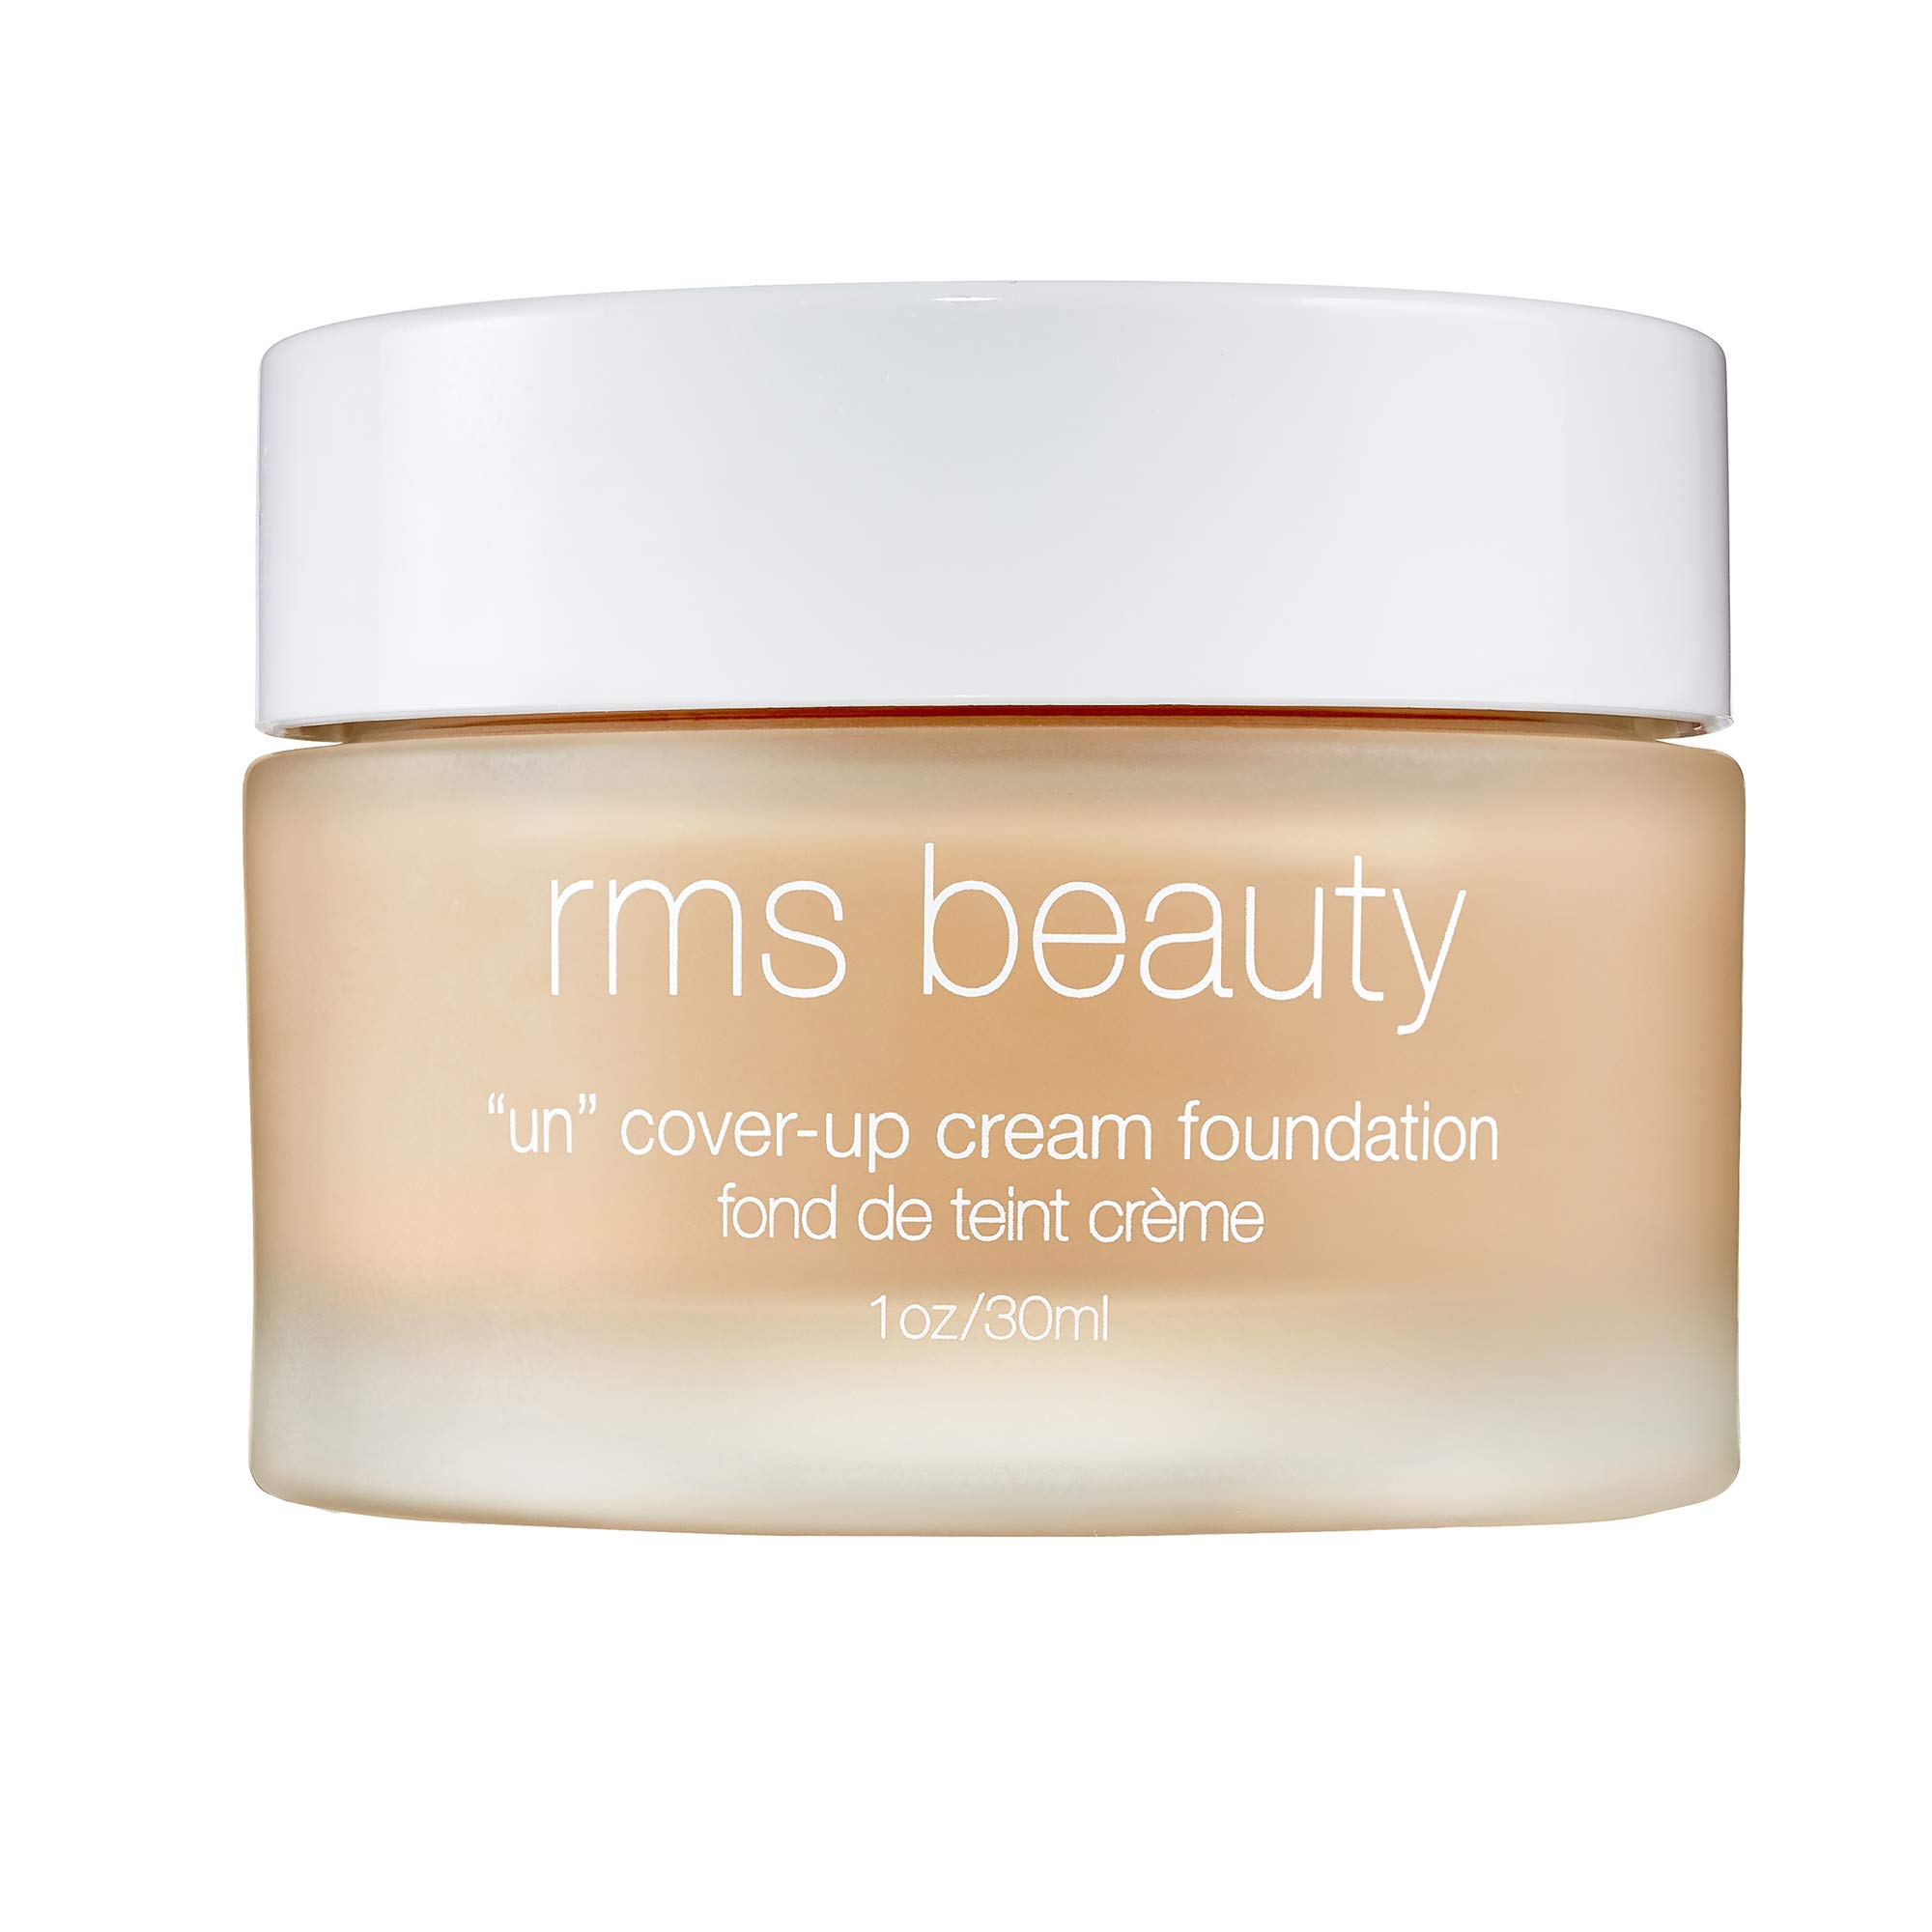 RMS Beauty “Un” Cover-Up Cream Foundation - Hydrating & Nourishing Organic Face Makeup Provides Lightweight & Even Coverage for Healthy, Luminous S...